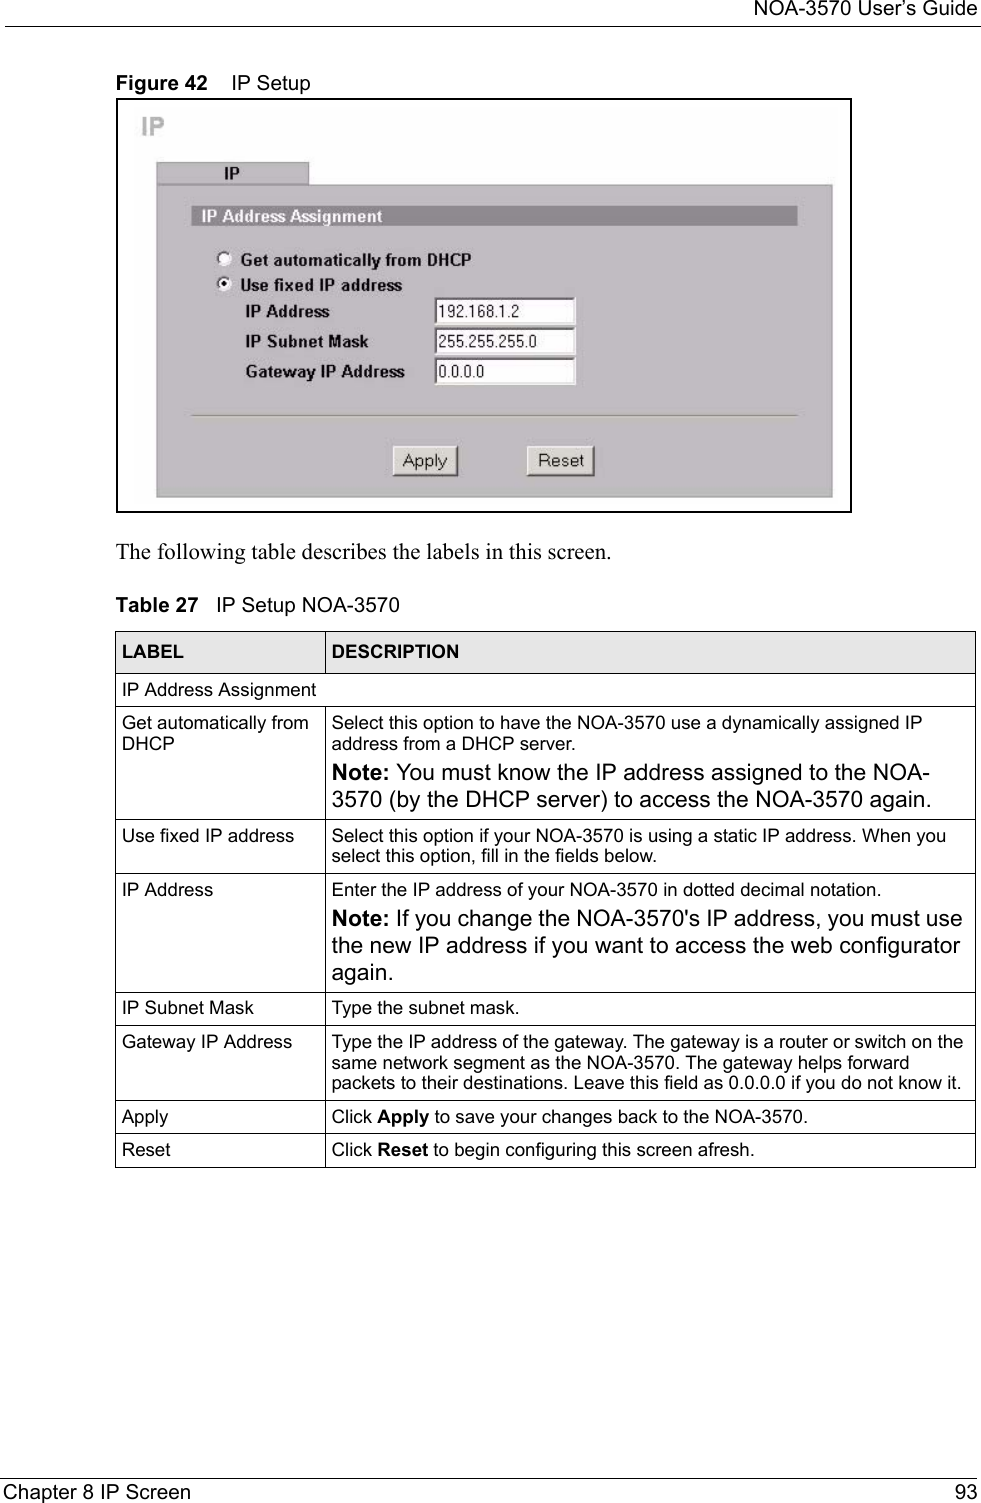 NOA-3570 User’s GuideChapter 8 IP Screen 93Figure 42    IP SetupThe following table describes the labels in this screen.Table 27   IP Setup NOA-3570LABEL DESCRIPTIONIP Address Assignment Get automatically from DHCP Select this option to have the NOA-3570 use a dynamically assigned IP address from a DHCP server. Note: You must know the IP address assigned to the NOA-3570 (by the DHCP server) to access the NOA-3570 again. Use fixed IP address Select this option if your NOA-3570 is using a static IP address. When you select this option, fill in the fields below.IP Address Enter the IP address of your NOA-3570 in dotted decimal notation. Note: If you change the NOA-3570&apos;s IP address, you must use the new IP address if you want to access the web configurator again.IP Subnet Mask Type the subnet mask.Gateway IP Address  Type the IP address of the gateway. The gateway is a router or switch on the same network segment as the NOA-3570. The gateway helps forward packets to their destinations. Leave this field as 0.0.0.0 if you do not know it.Apply Click Apply to save your changes back to the NOA-3570.Reset Click Reset to begin configuring this screen afresh.